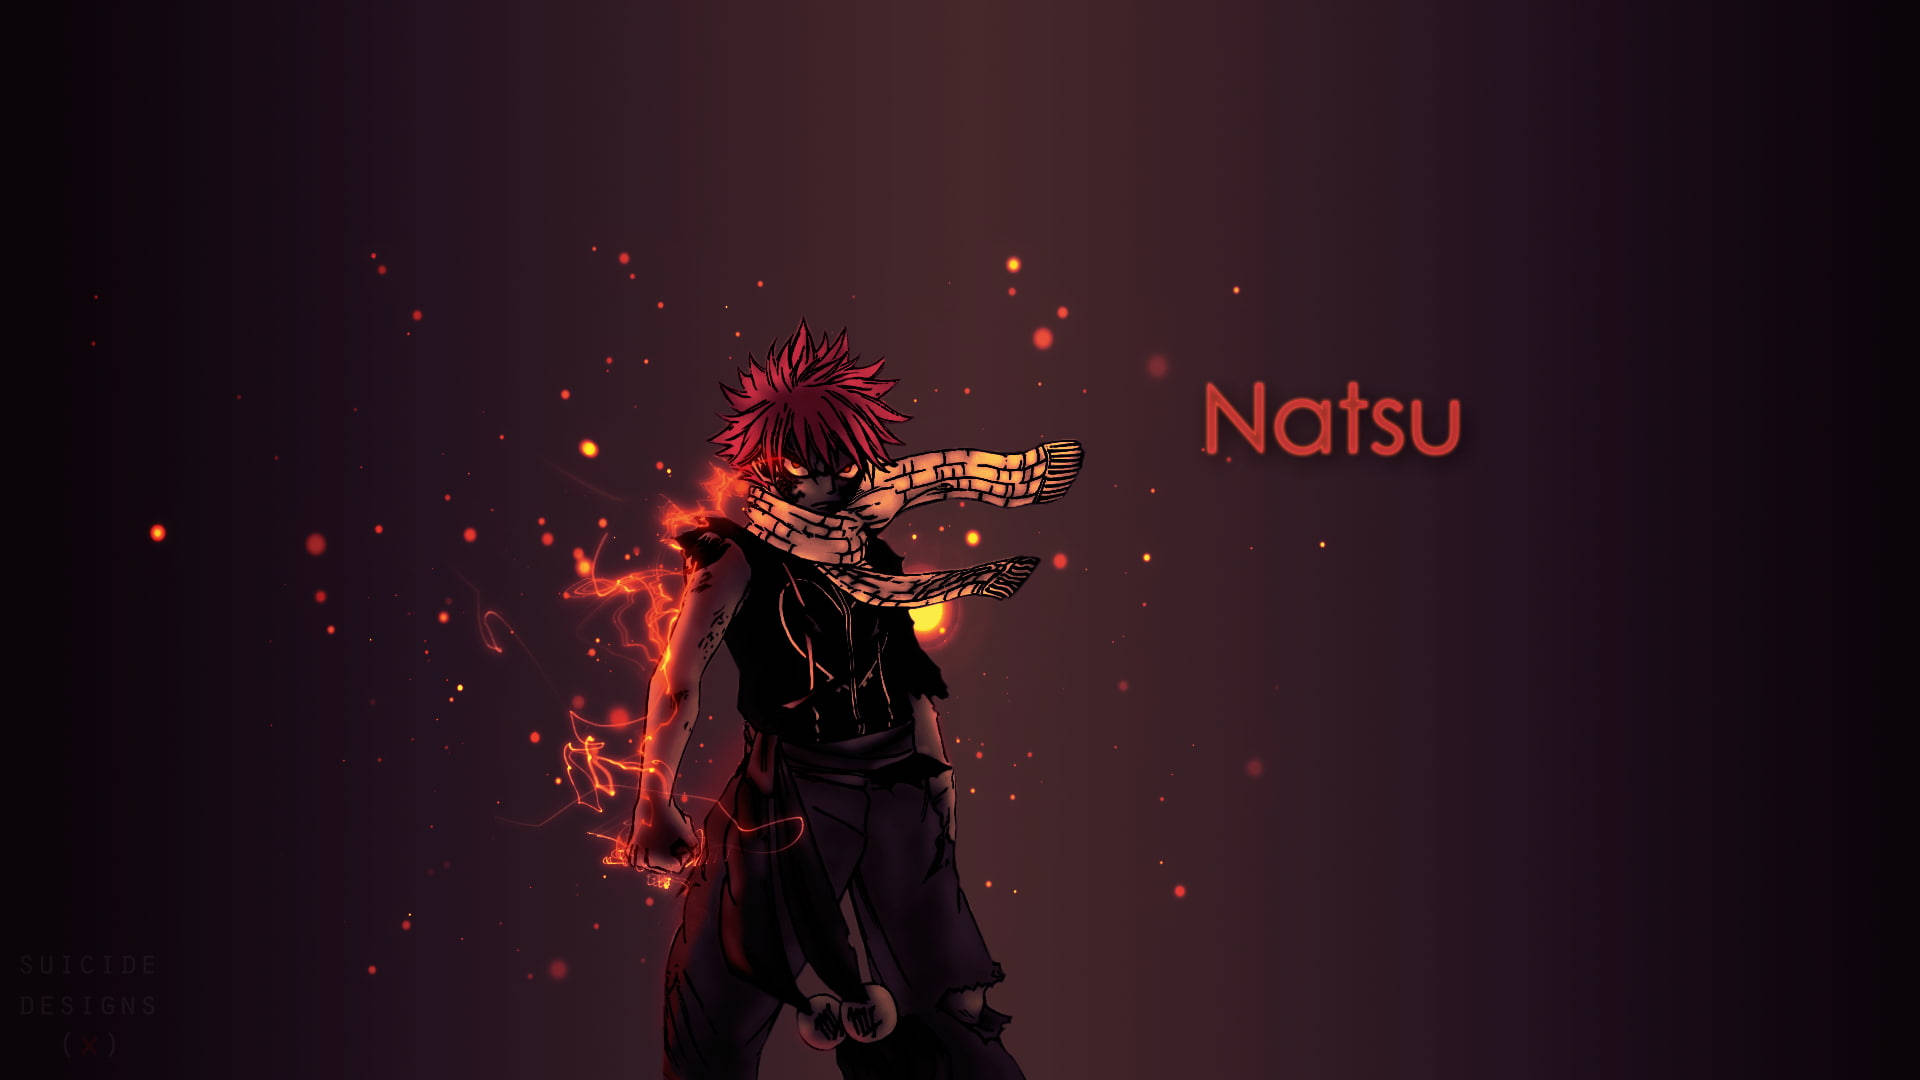 Fairy Tail Character Natsu Dragneel Background